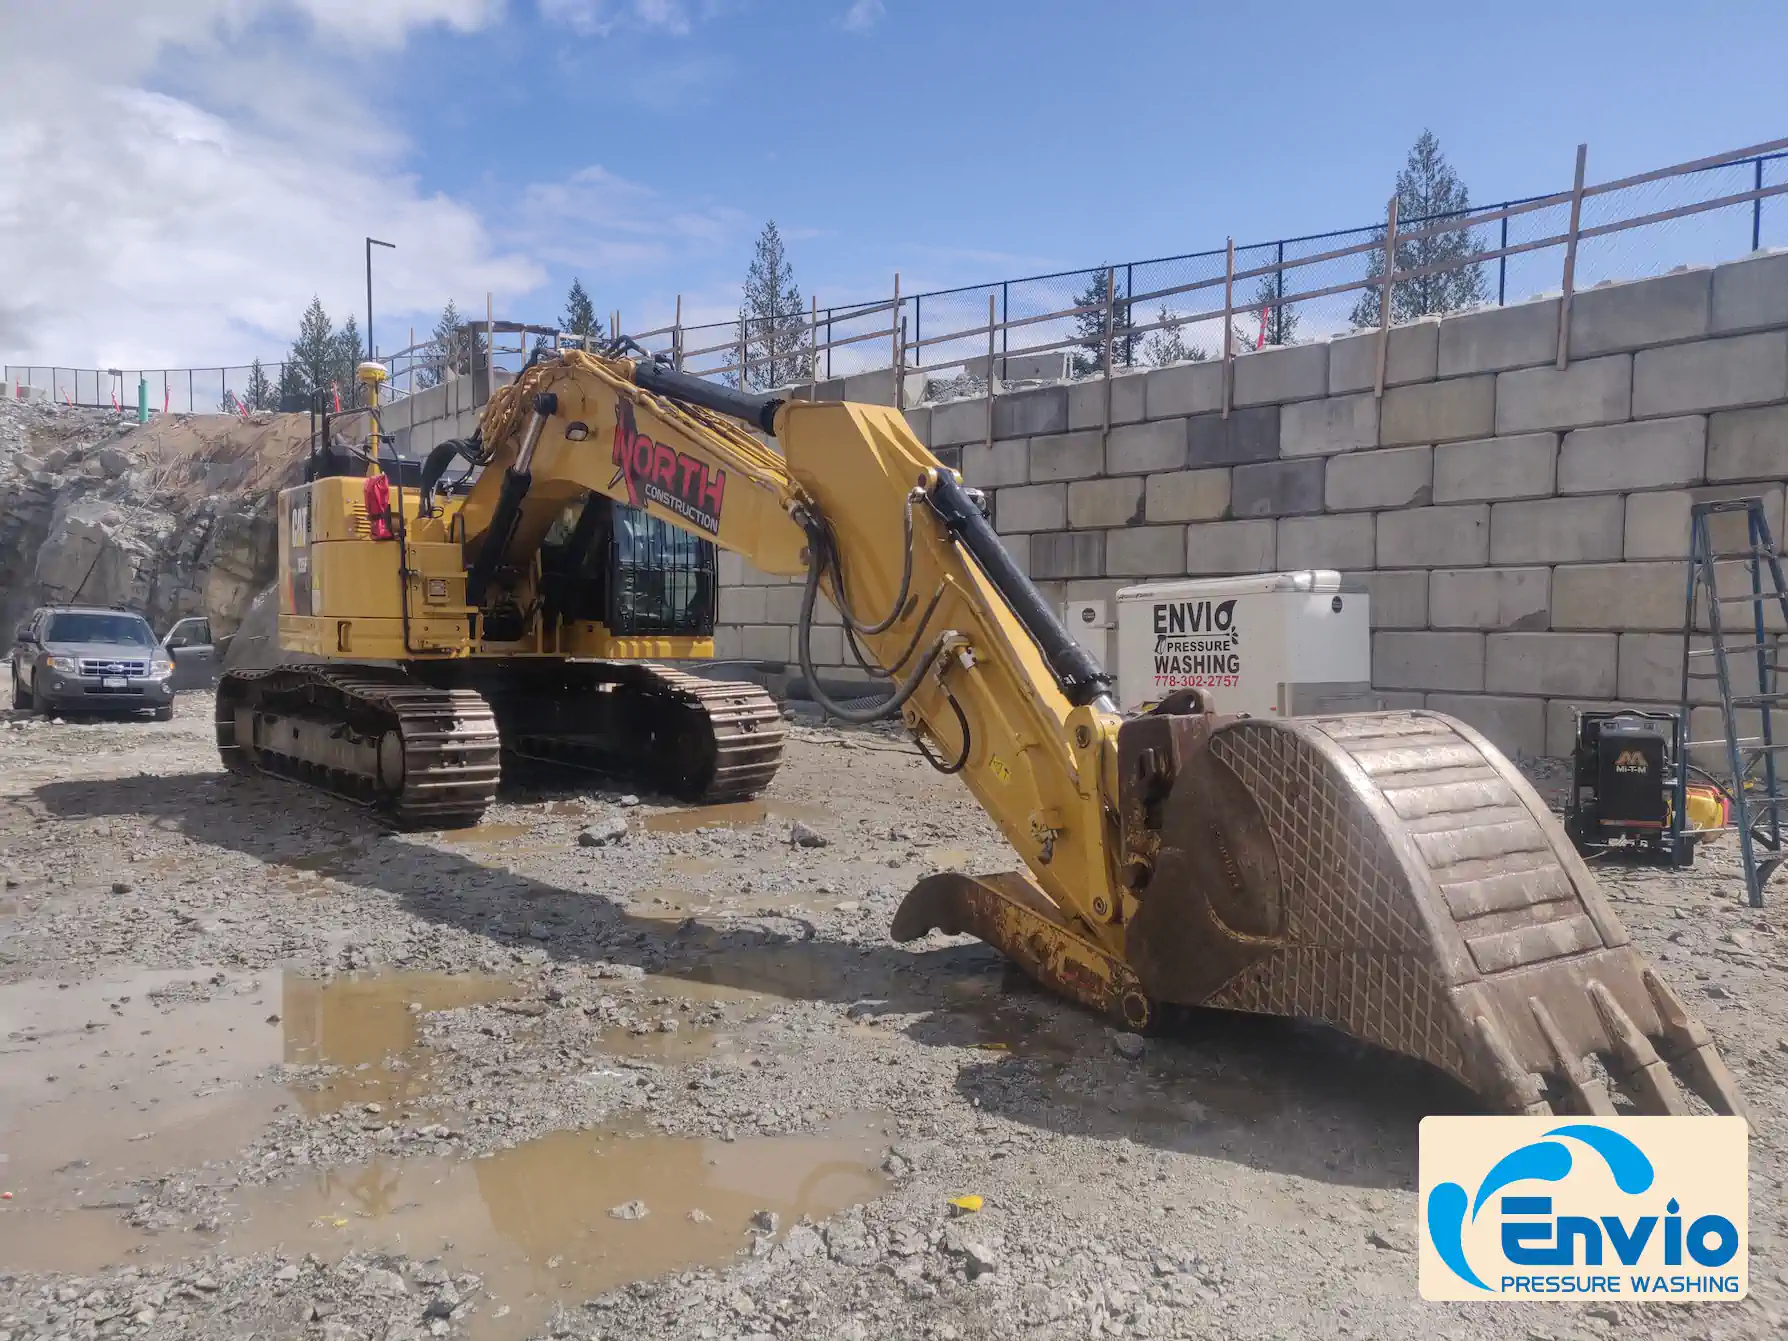 Large excavator cleaning and degreasing after